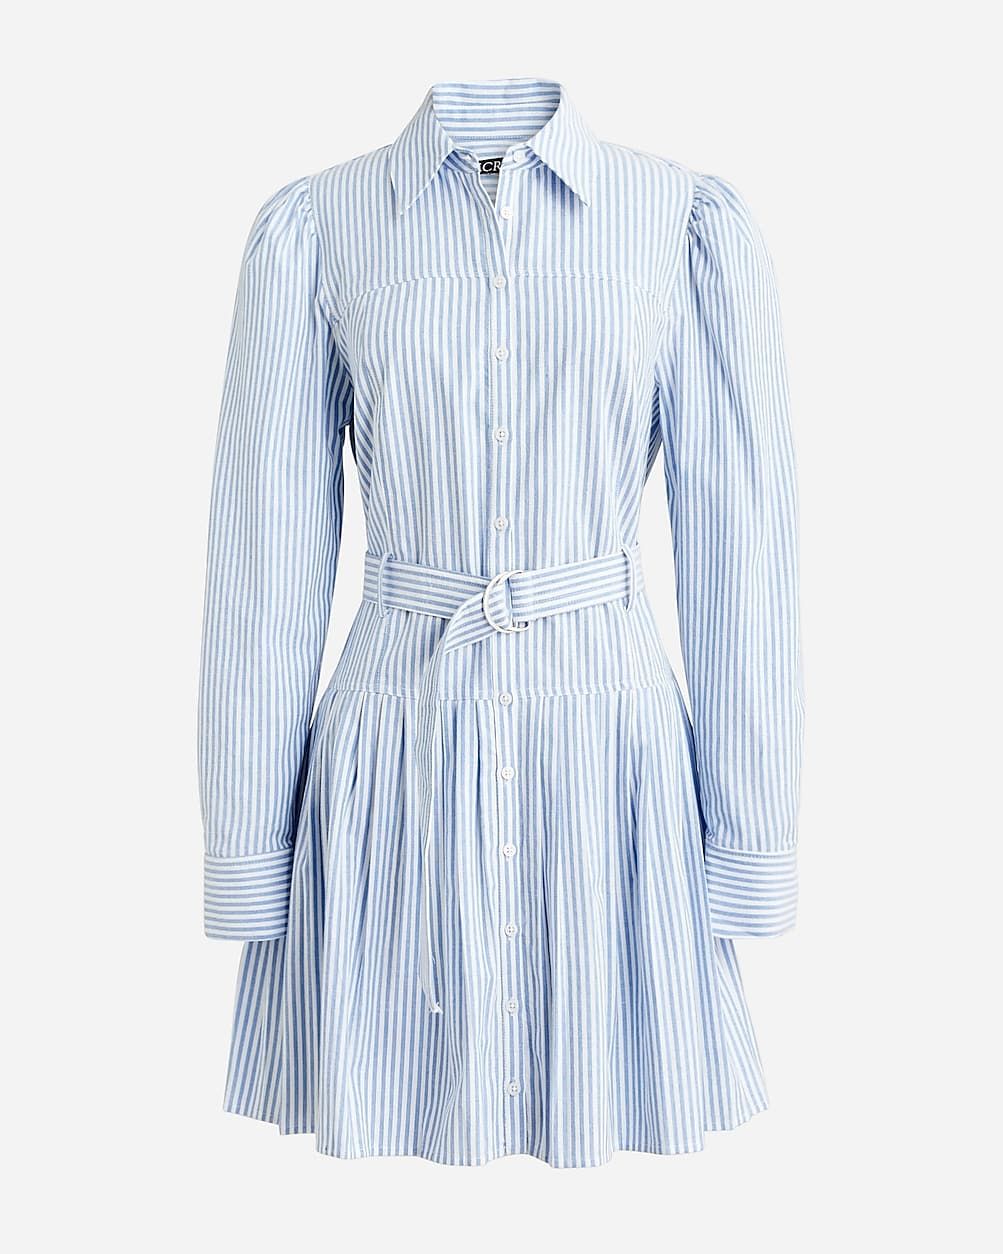 5.0(3 REVIEWS)Fit-and-flare shirtdress in striped lightweight oxford$99.50$168.00 (41% Off)Dress ... | J.Crew US